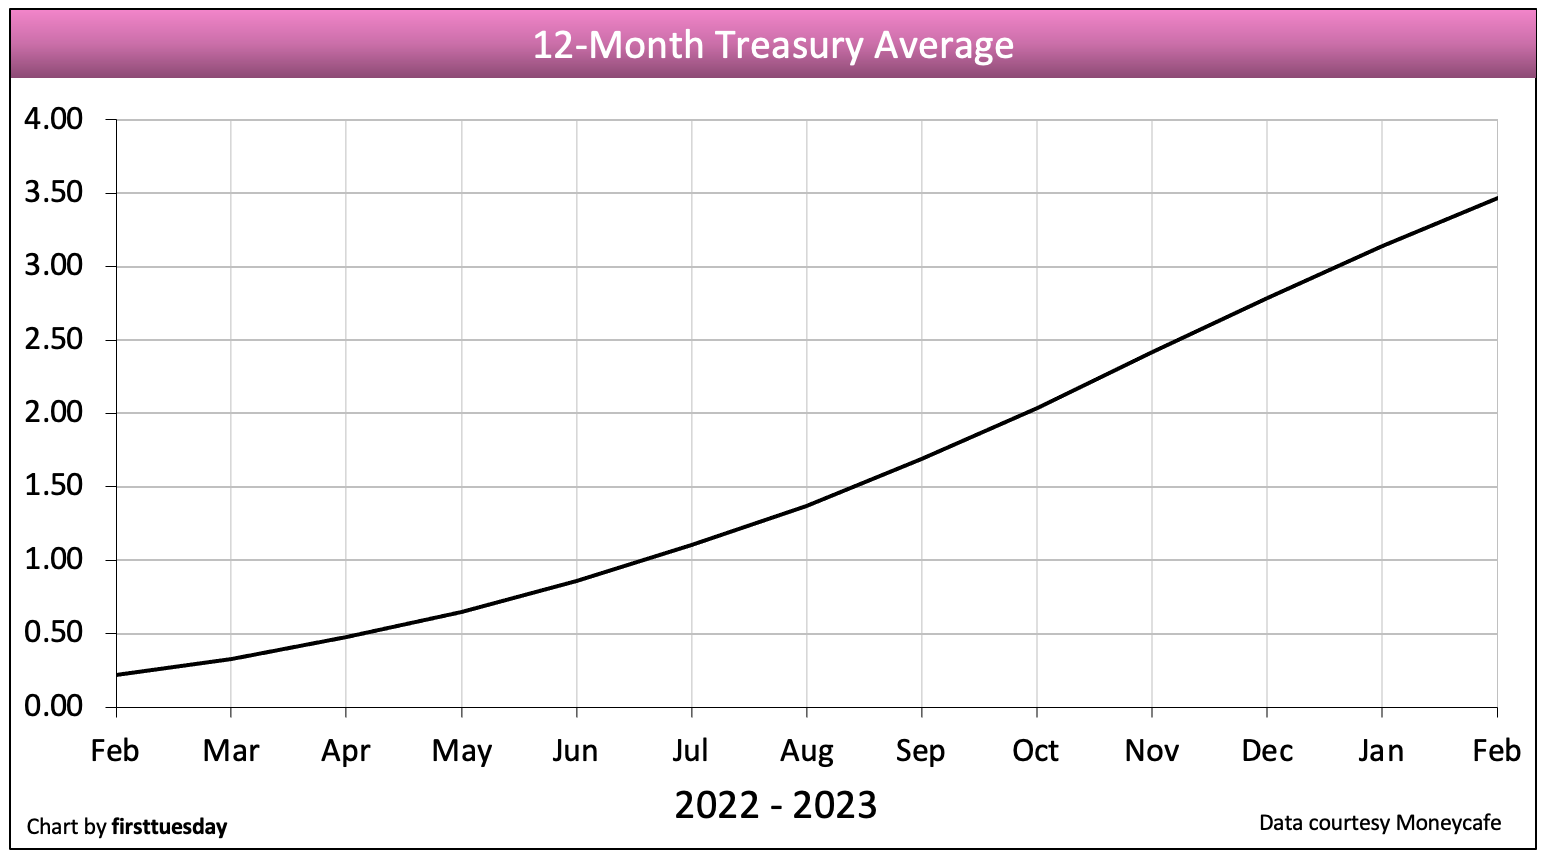 This chart shows the 12-month Treasury Average through February 2023.